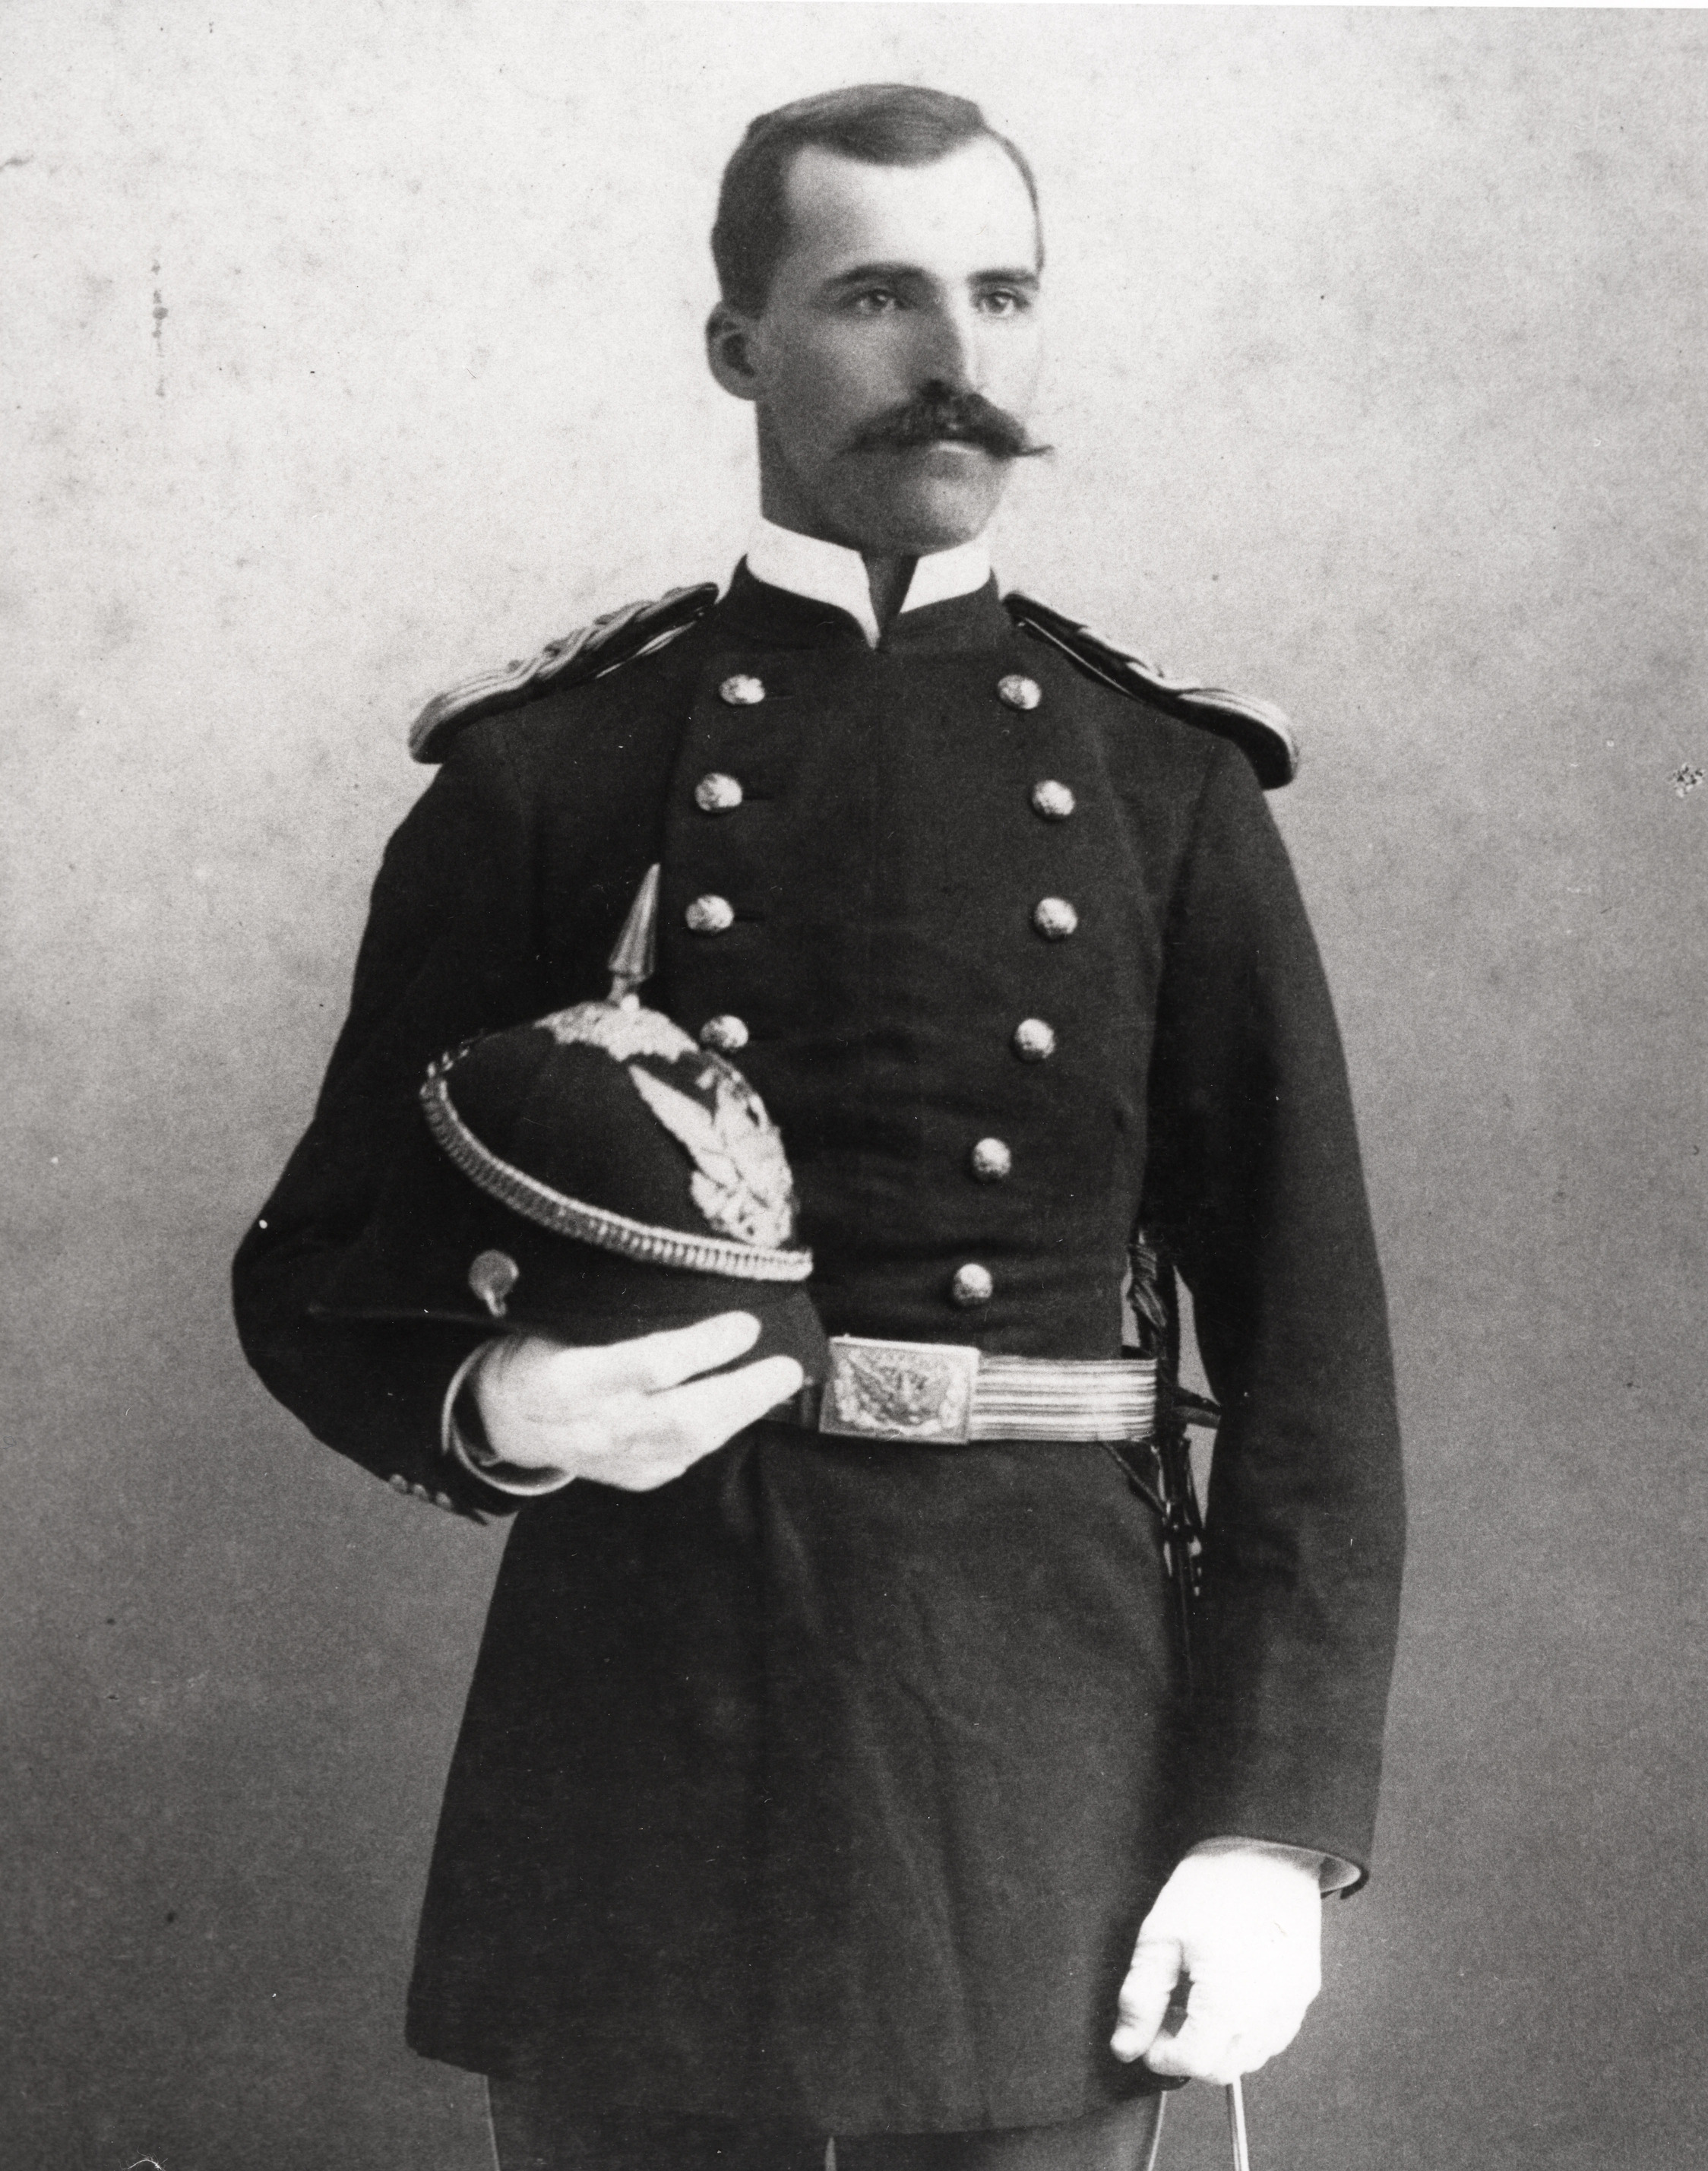 Black and white photograph of a man in a military uniform standing for a photograph